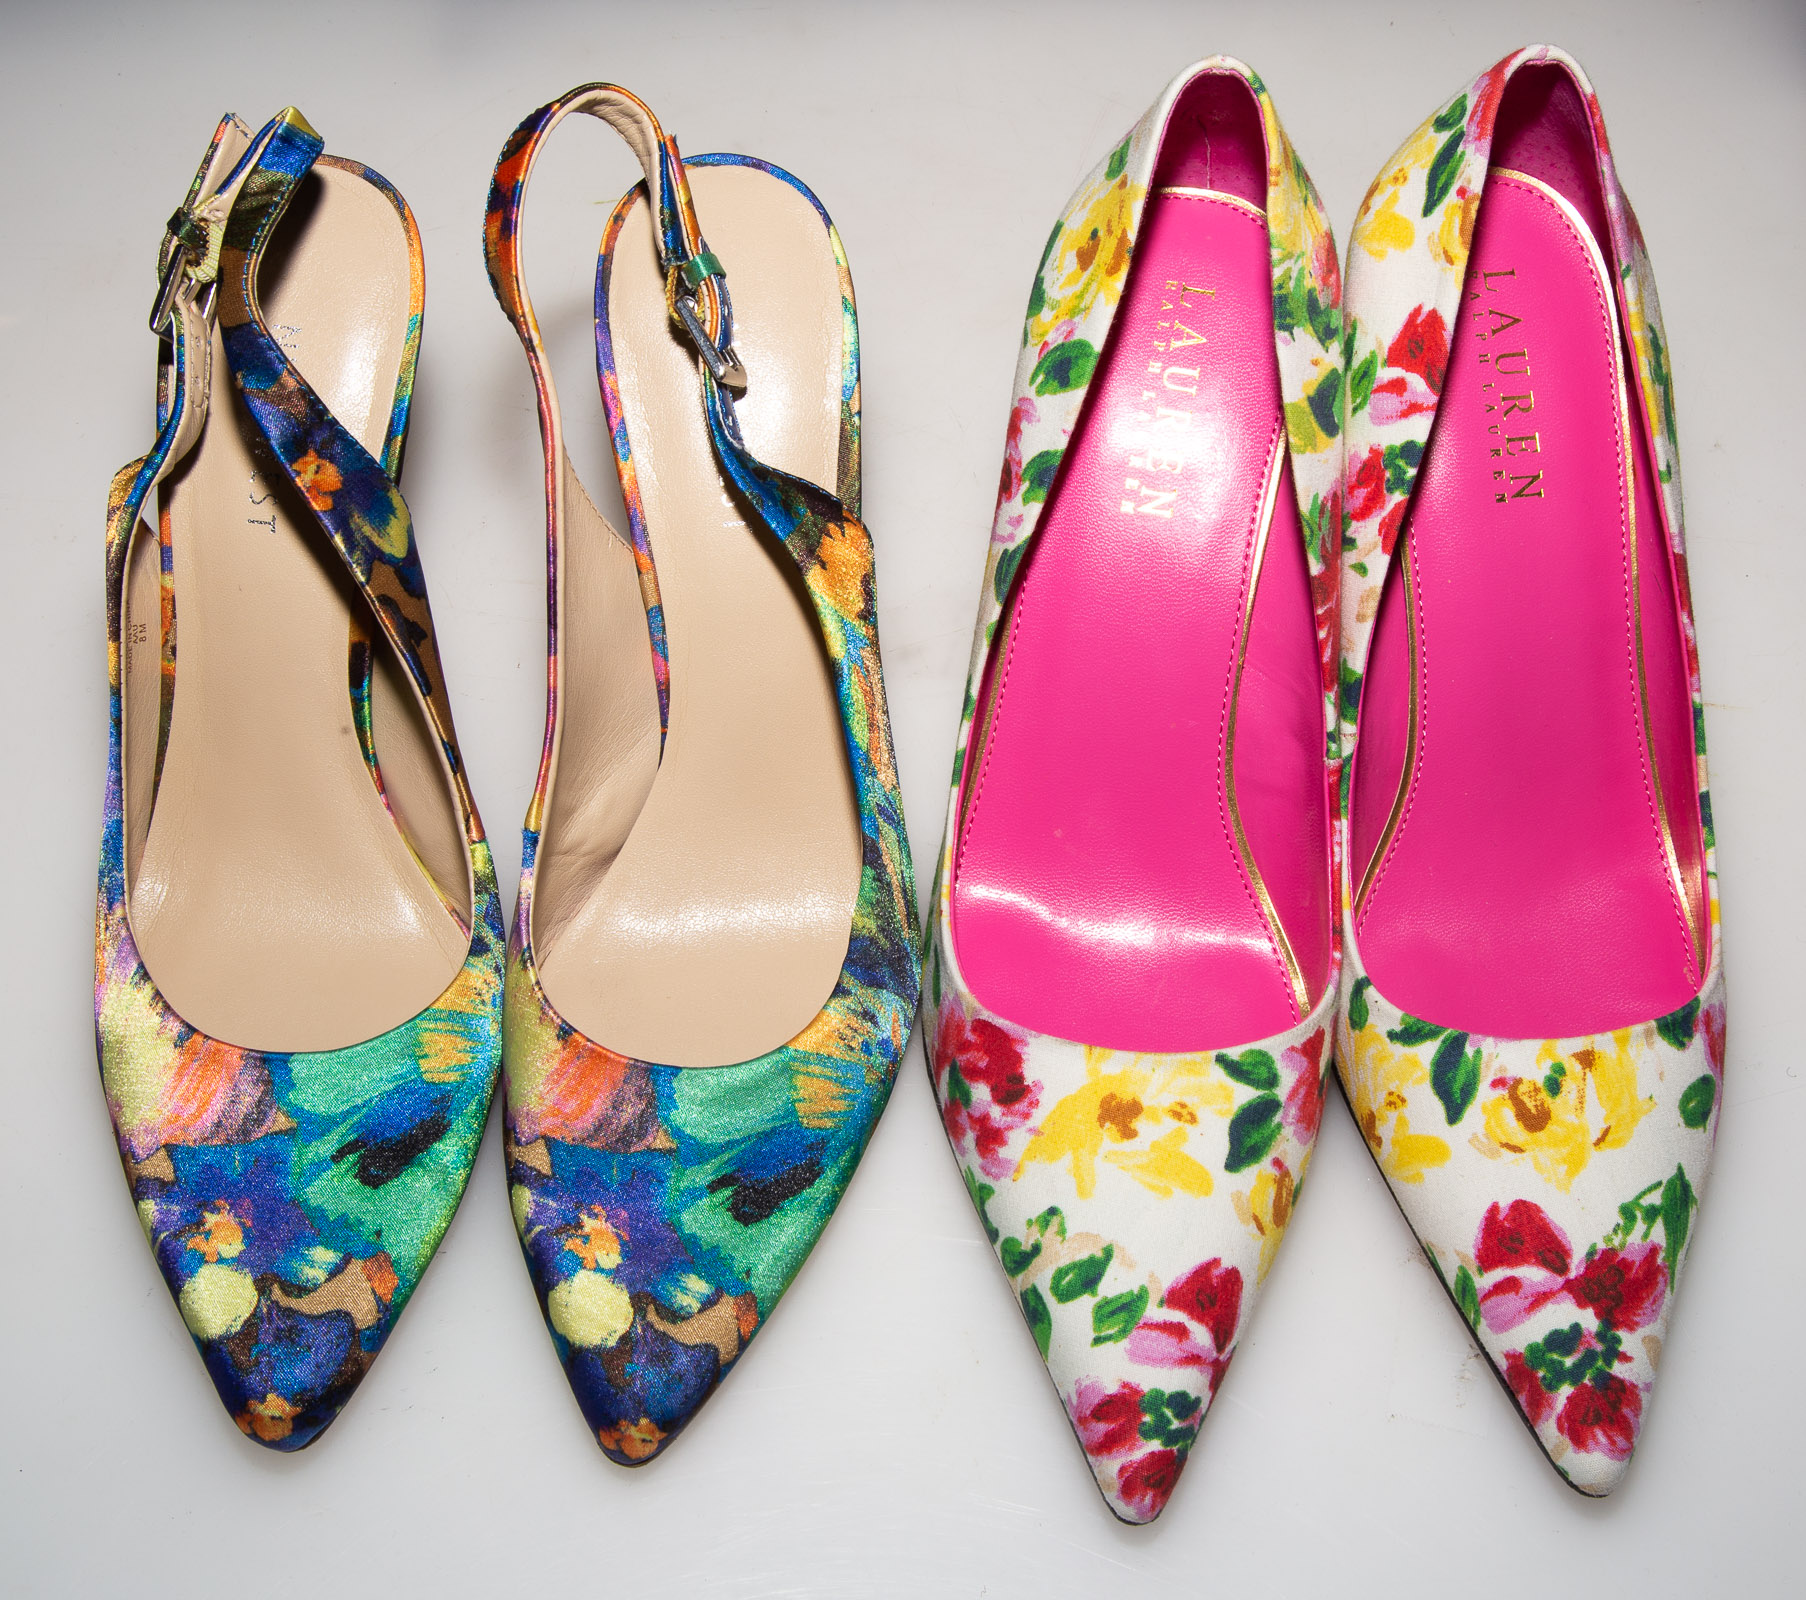 TWO PAIRS FLORAL PRINT HEELS including 3370a6